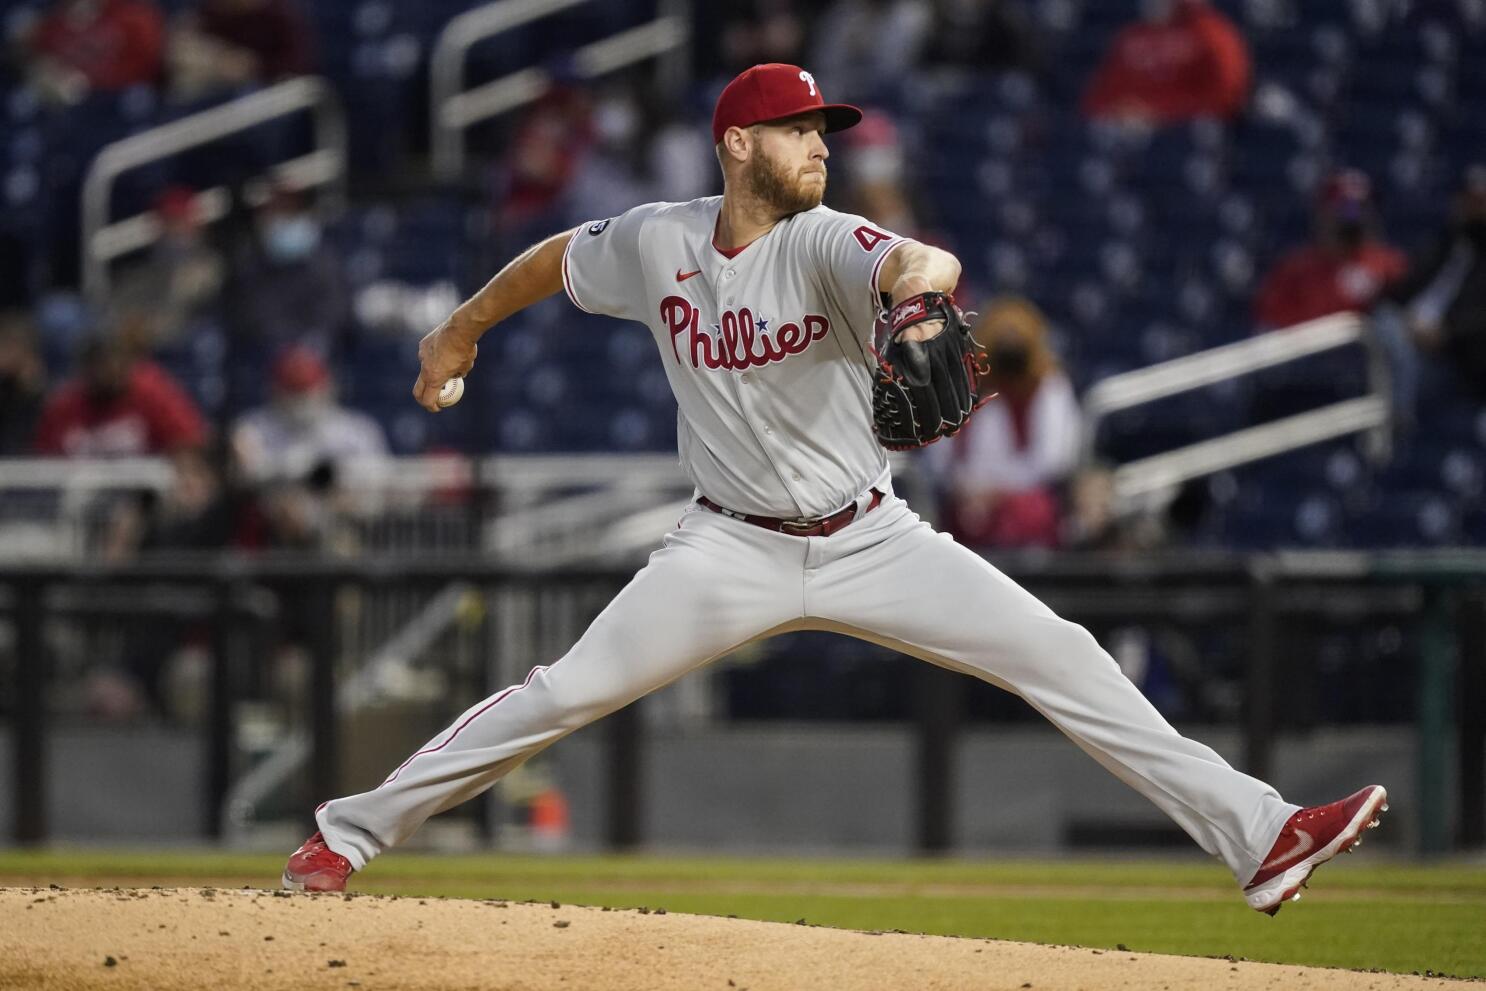 Phillies rally off Nats closer Hand, collect 5-2 win in 10th